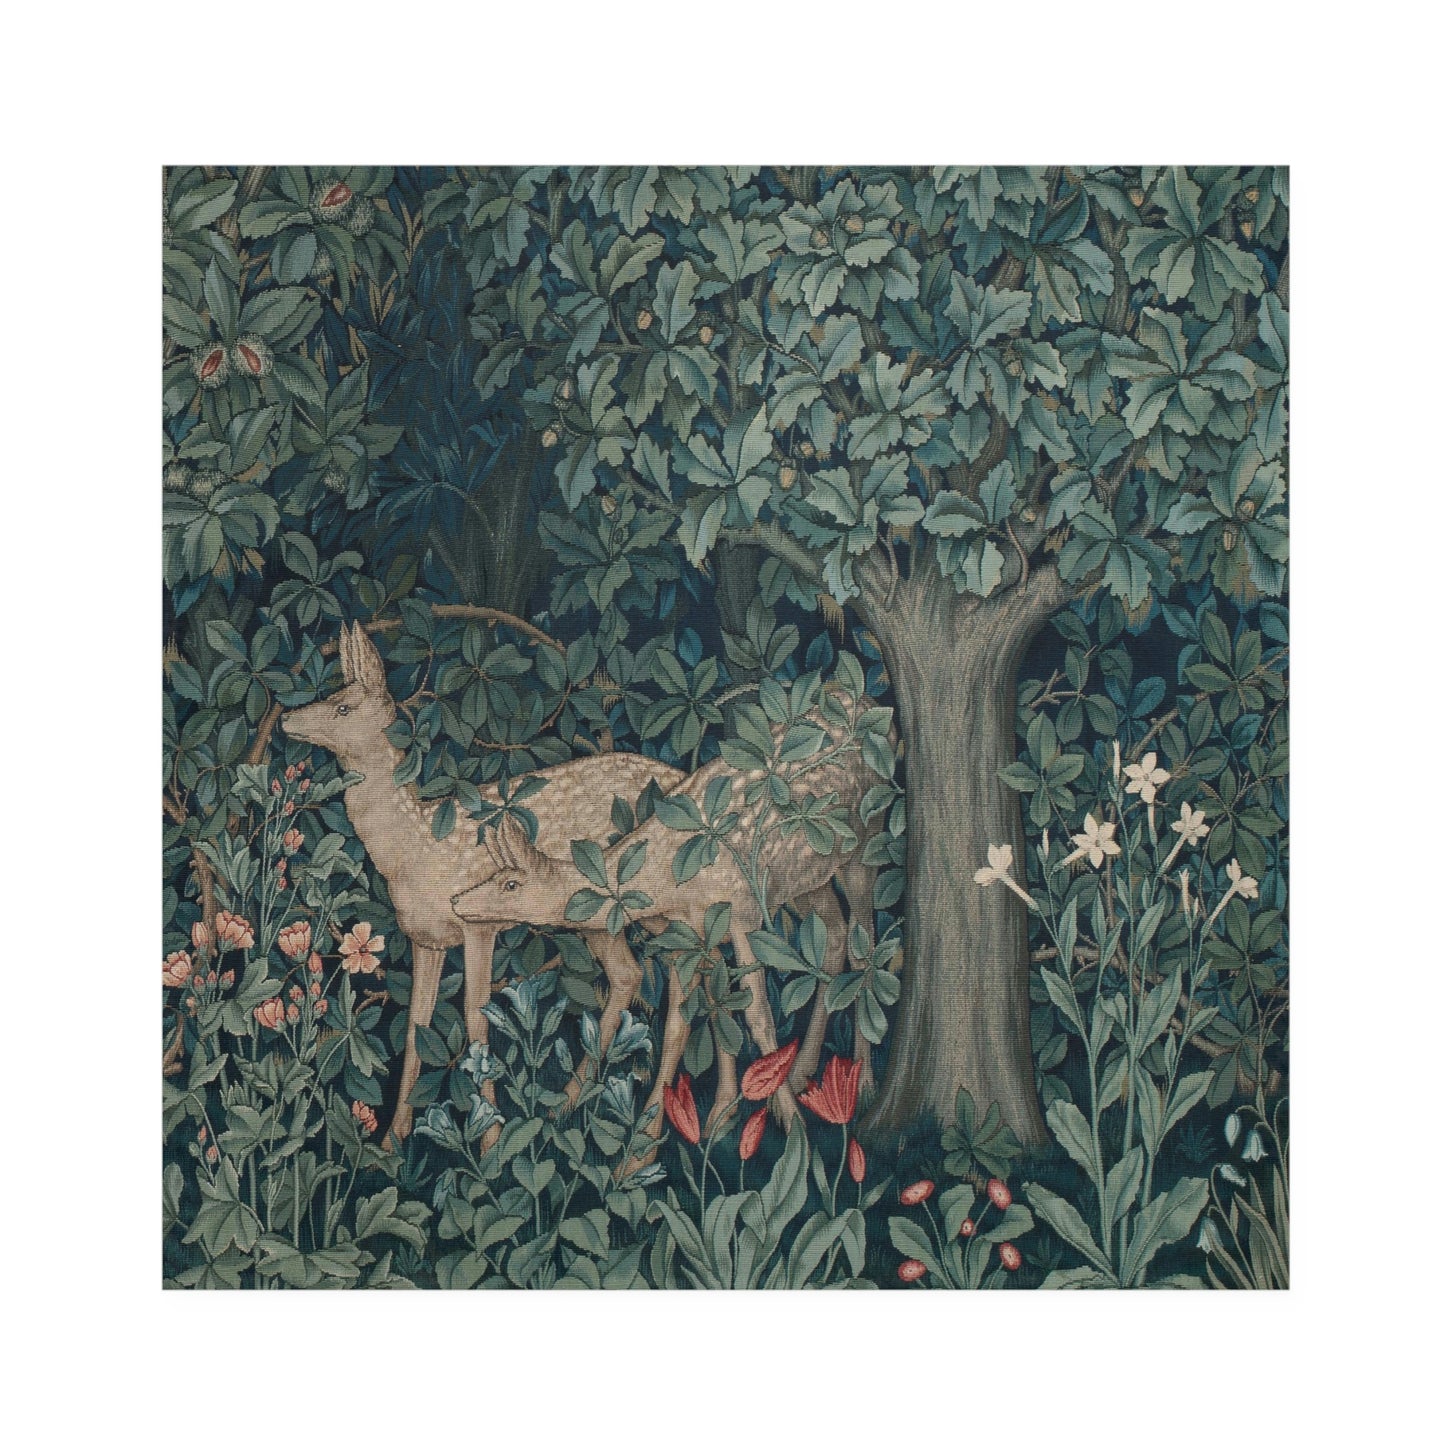 William-Morris-&-Co-Table-Napkins-Dear-by-John-Henry-Dearle-Green-Forest-Collection-2william-morris-co-table-napkins-greenery-collection-dear-2